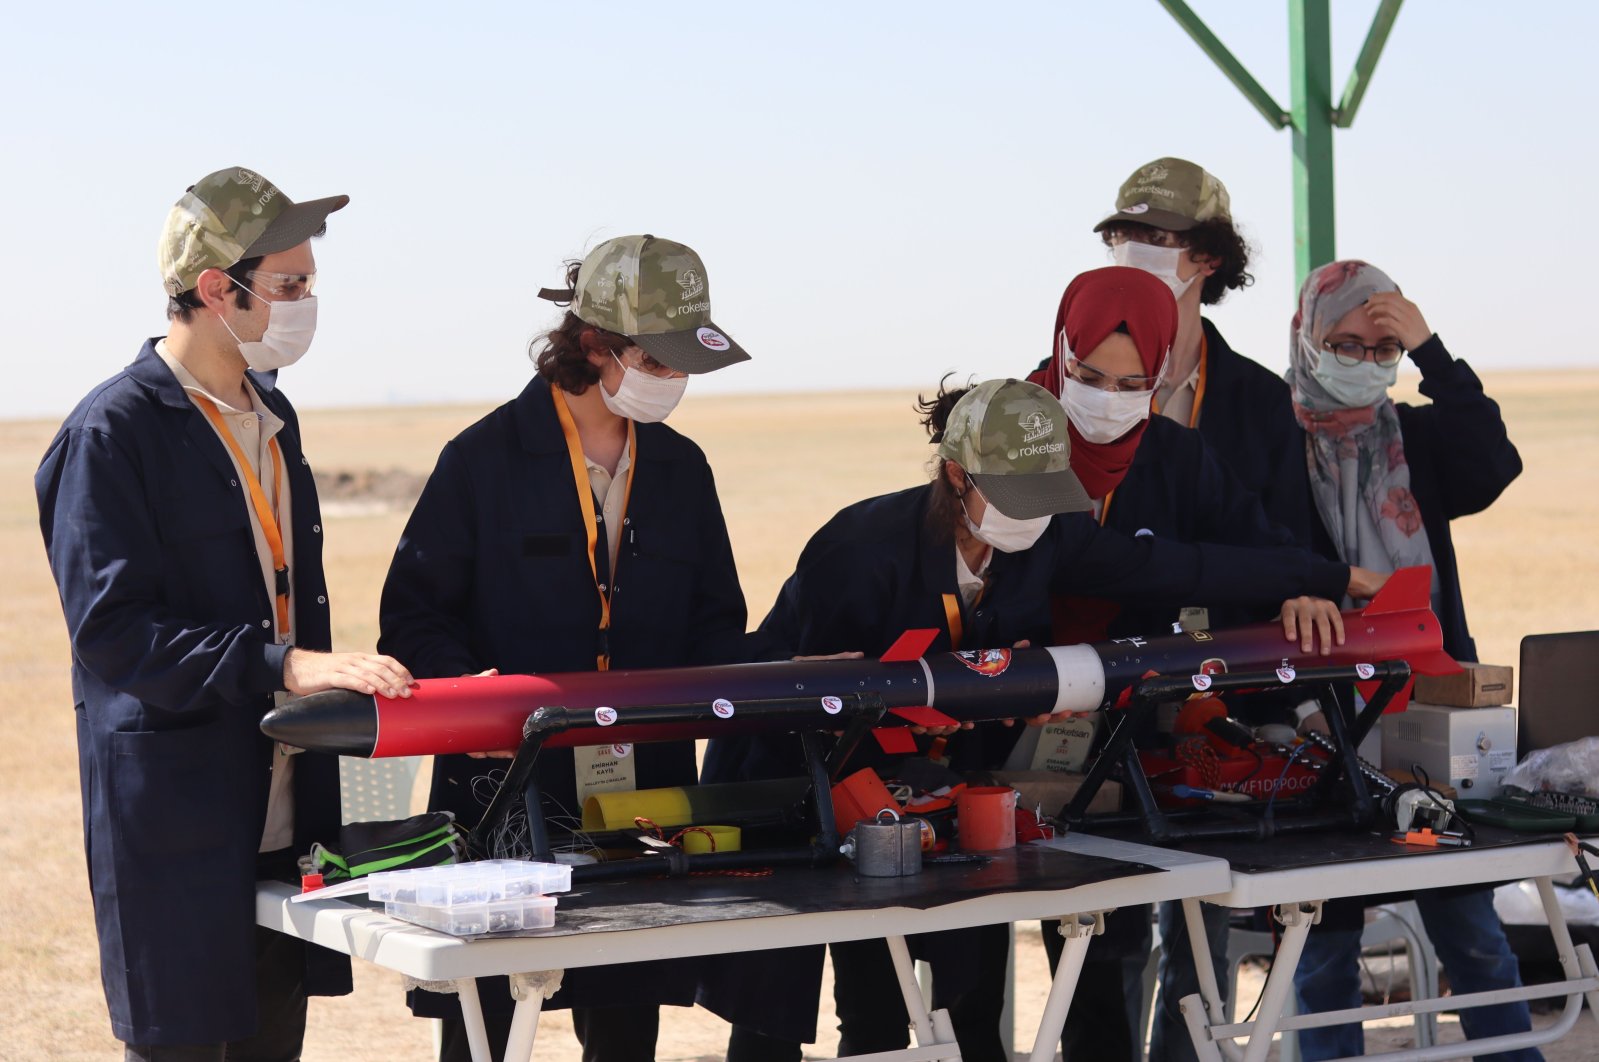 Sixteen-year-old Emirhan Kayiş (2nd from L) works with his team "Halley's Apprentices" during the Teknofest Rocket Competition in Turkey's central Aksaray province, Sept. 4, 2020. (Daily Sabah Photo)